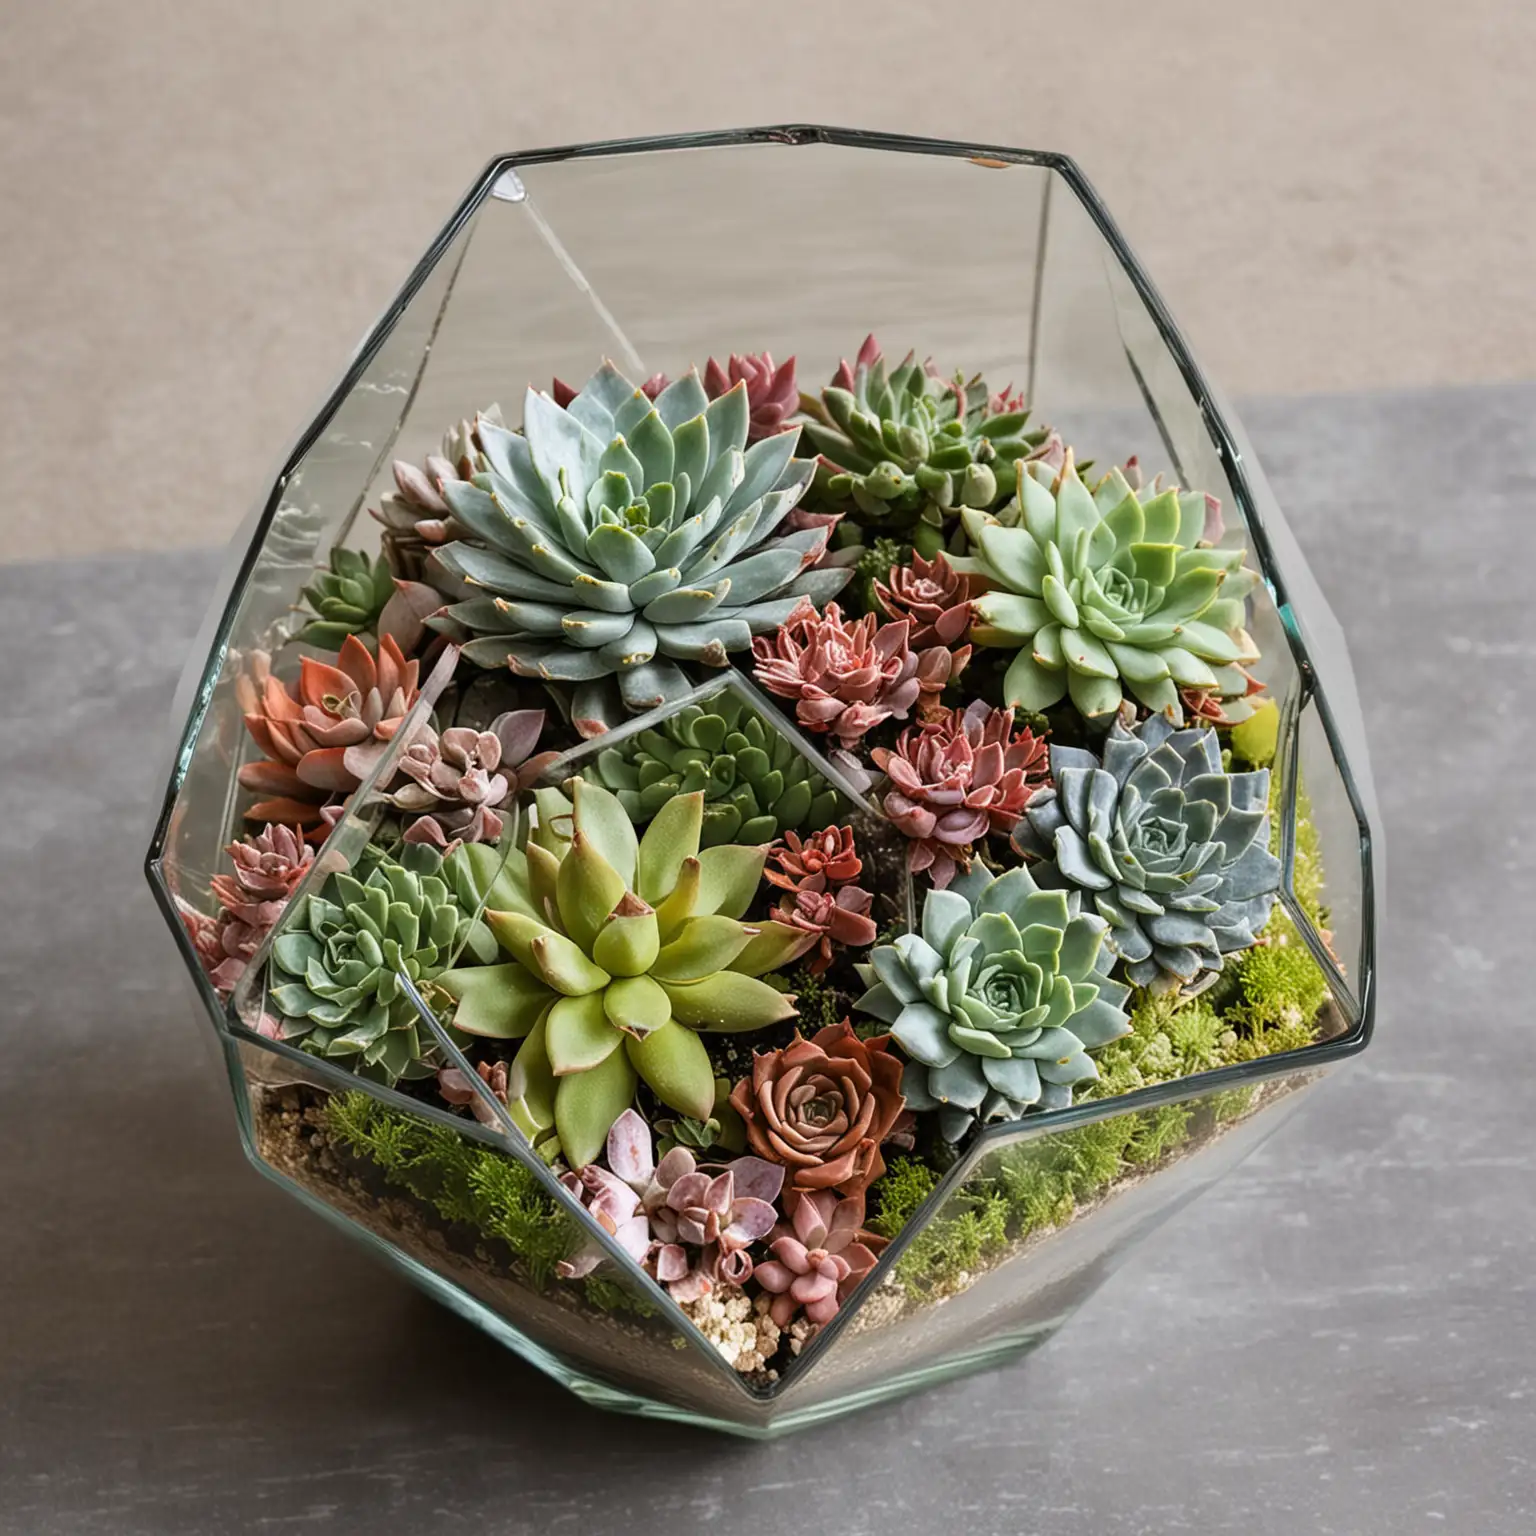 Geometric-Terrarium-Vase-with-Succulents-and-Tropical-Flowers